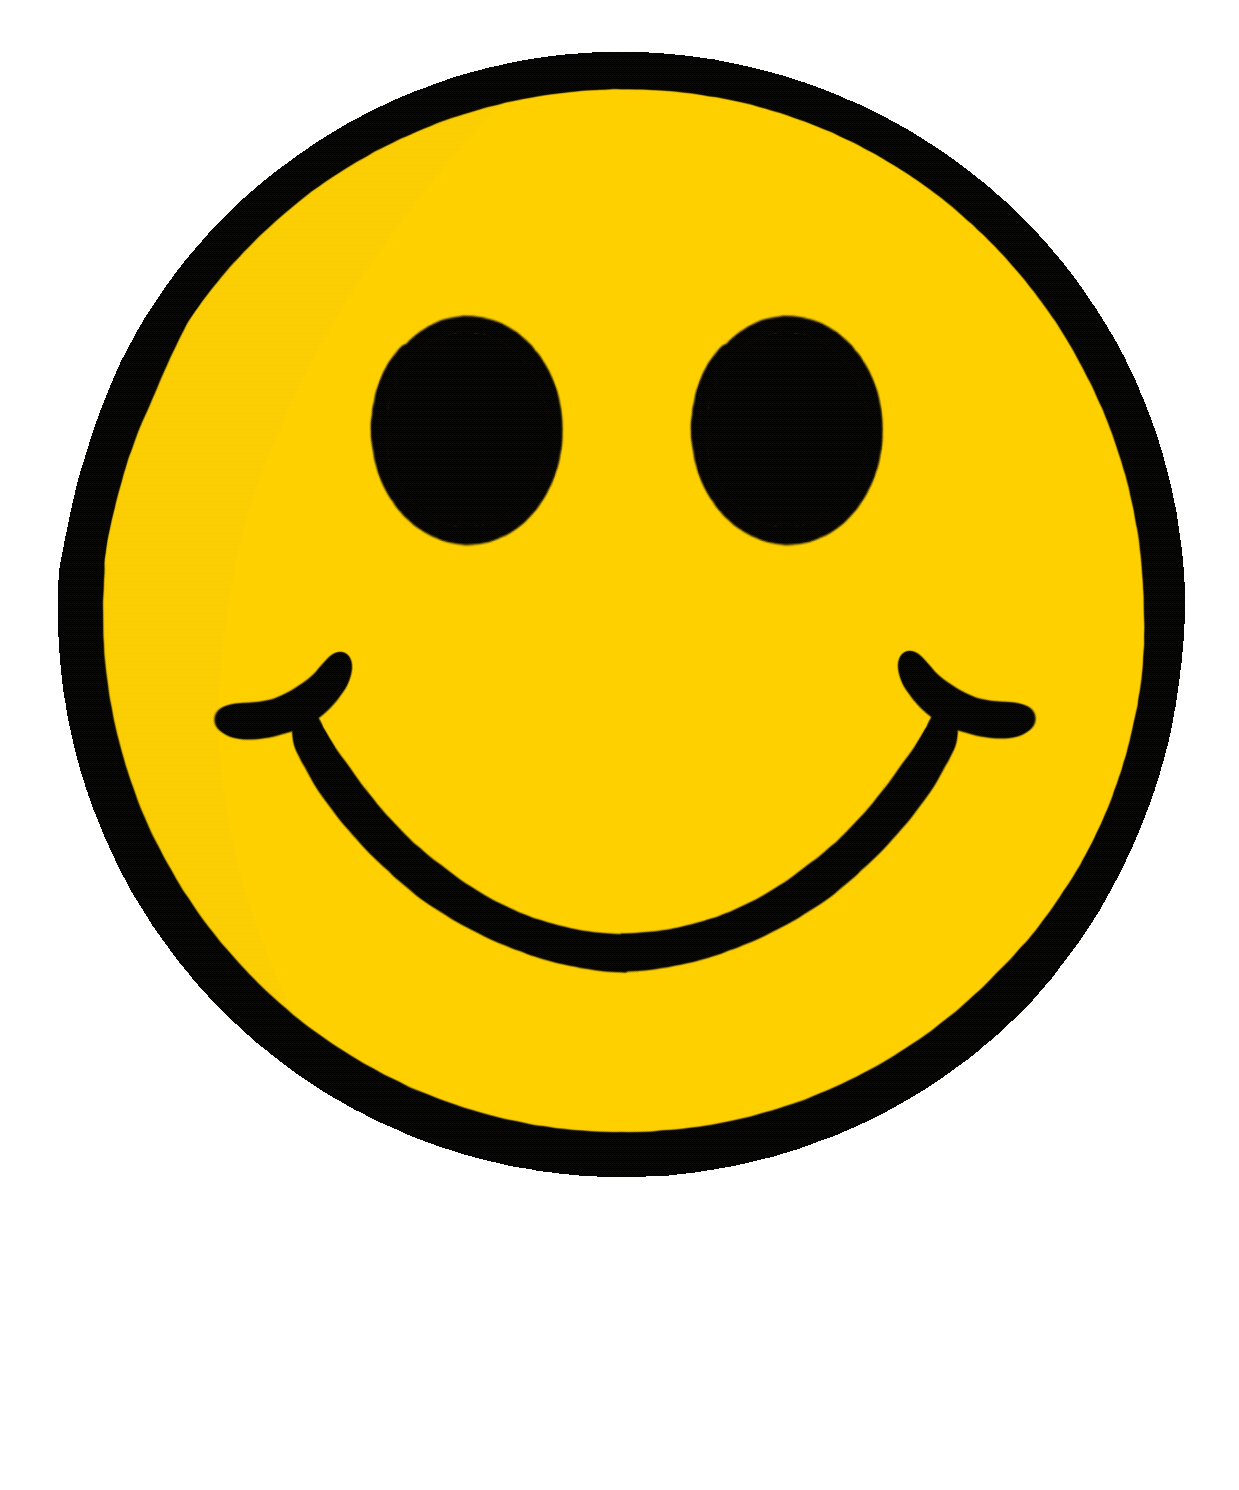 Happy Smiley Face Sticker by Nikki Méndez for iOS & Android | GIPHY